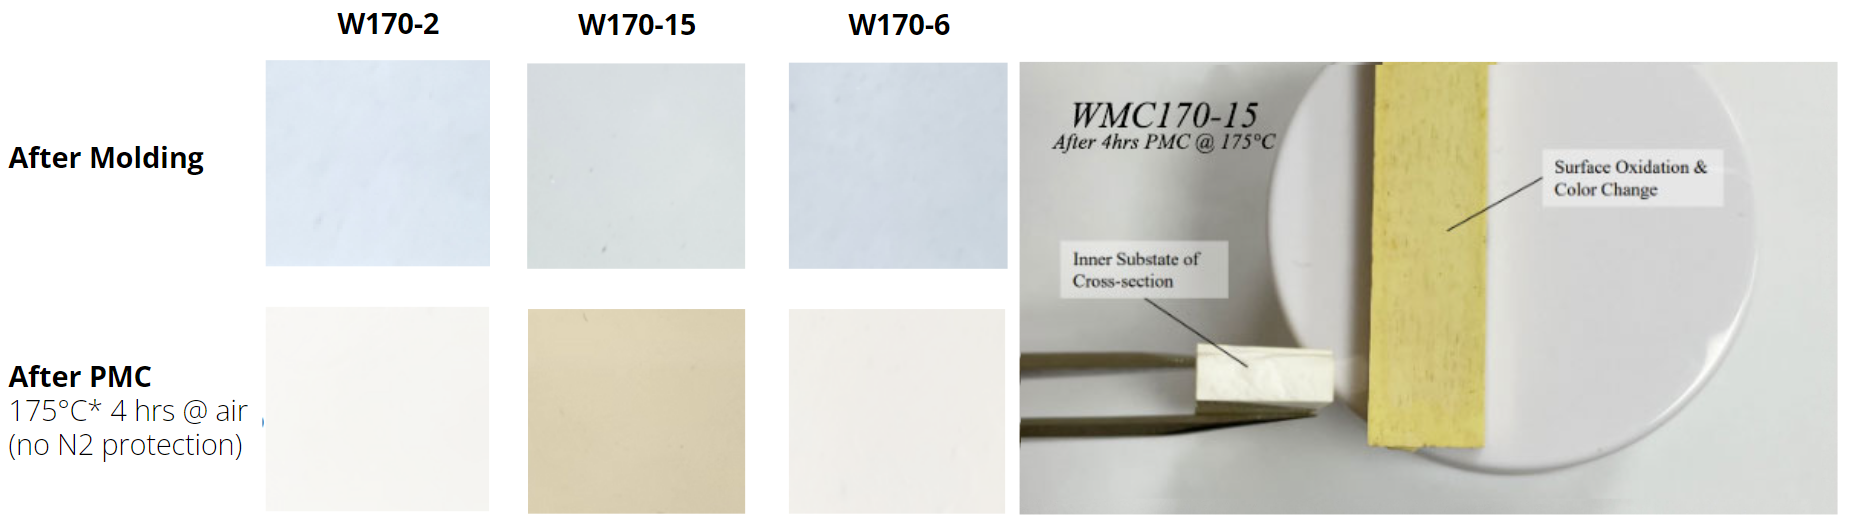 GT-W170 white reflective compound yellowing images after molding